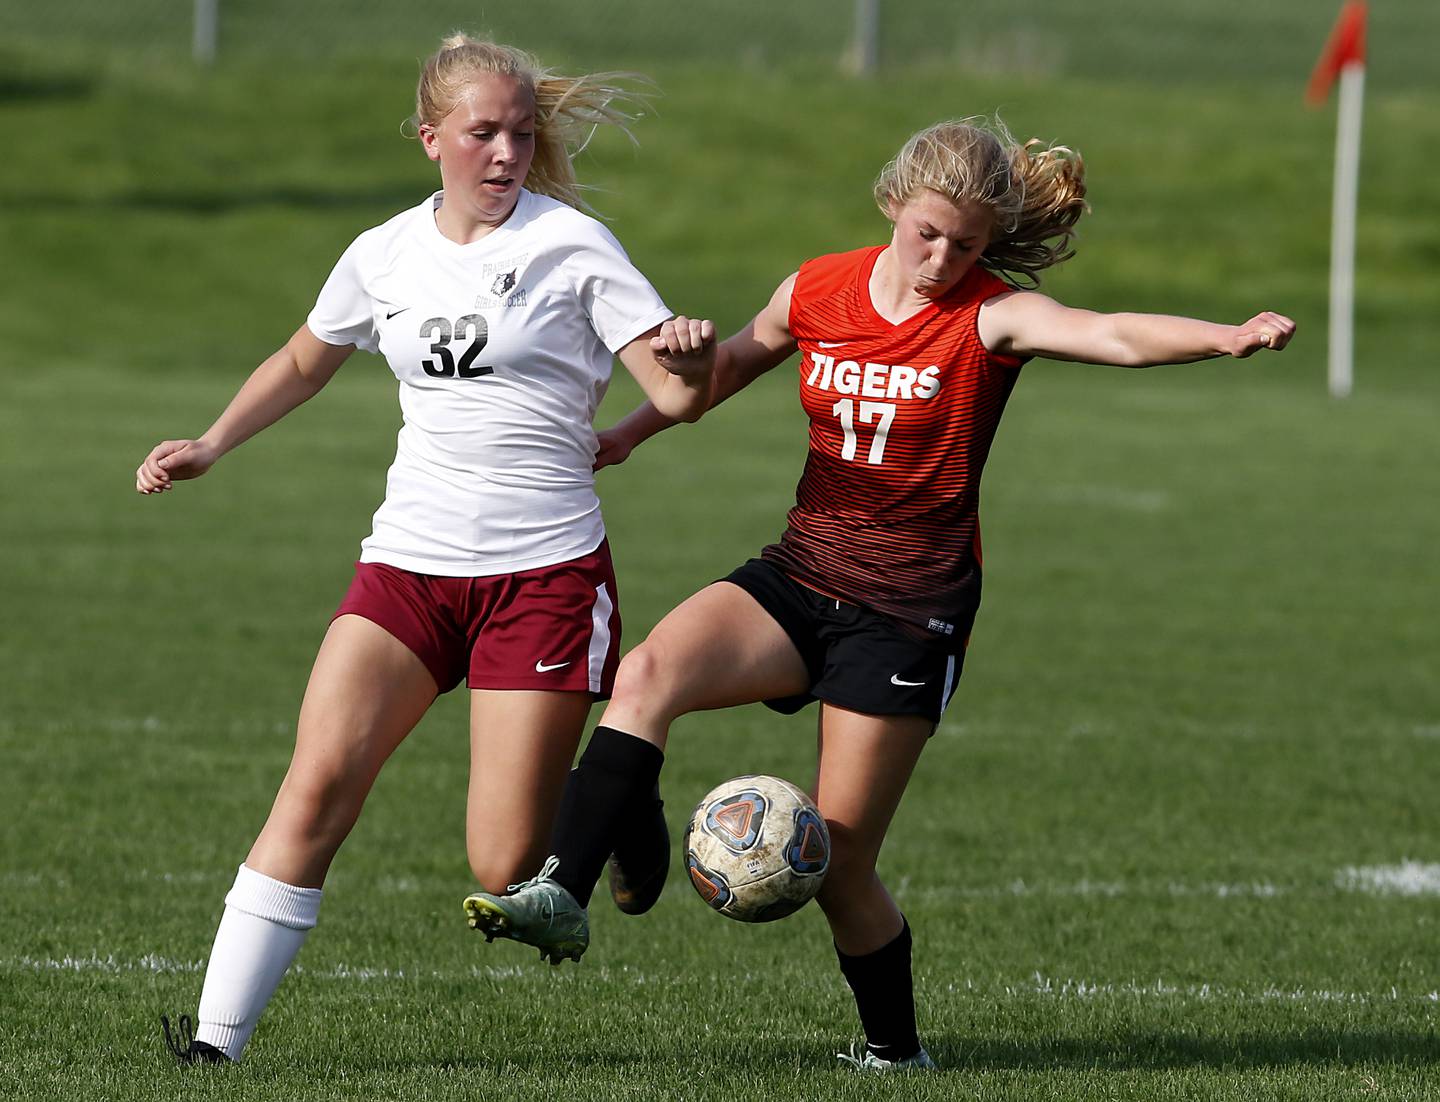 Crystal Lake Central's Olivia Anderson, right, controls the ball in front of Prairie Ridge's Breanna Pollack during a Fox Valley Conference soccer match Tuesday, May 10, 2022, between Crystal Lake Central and Prairie Ridge at Crystal Lake Central High School.